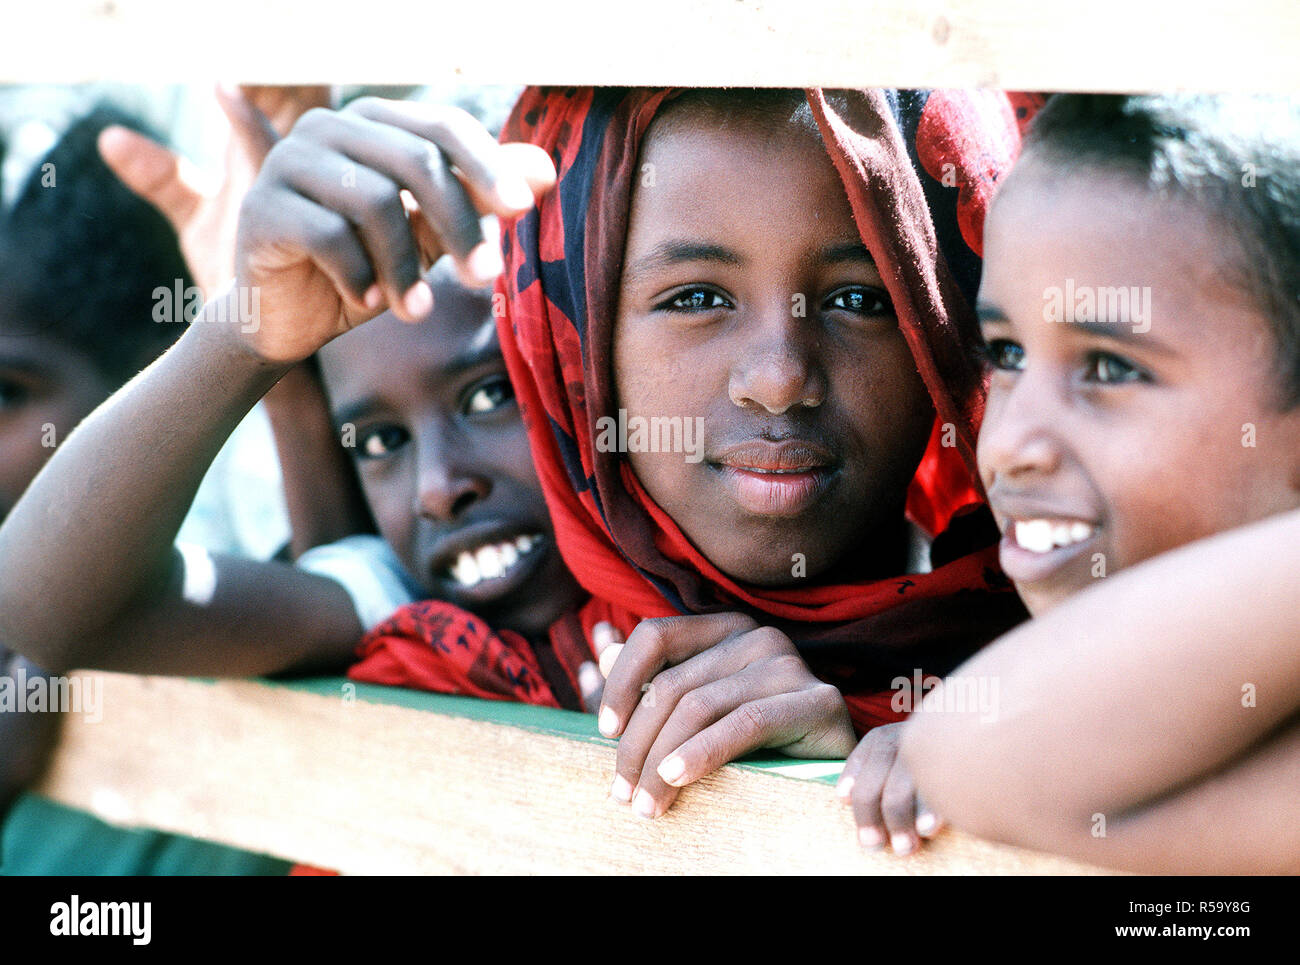 1993 - Somali children watch members of Naval Mobile Construction Battalion 1 (NMCB-1) as they work to improve a local school during the multinational relief effort OPERATION RESTORE HOPE. Stock Photo